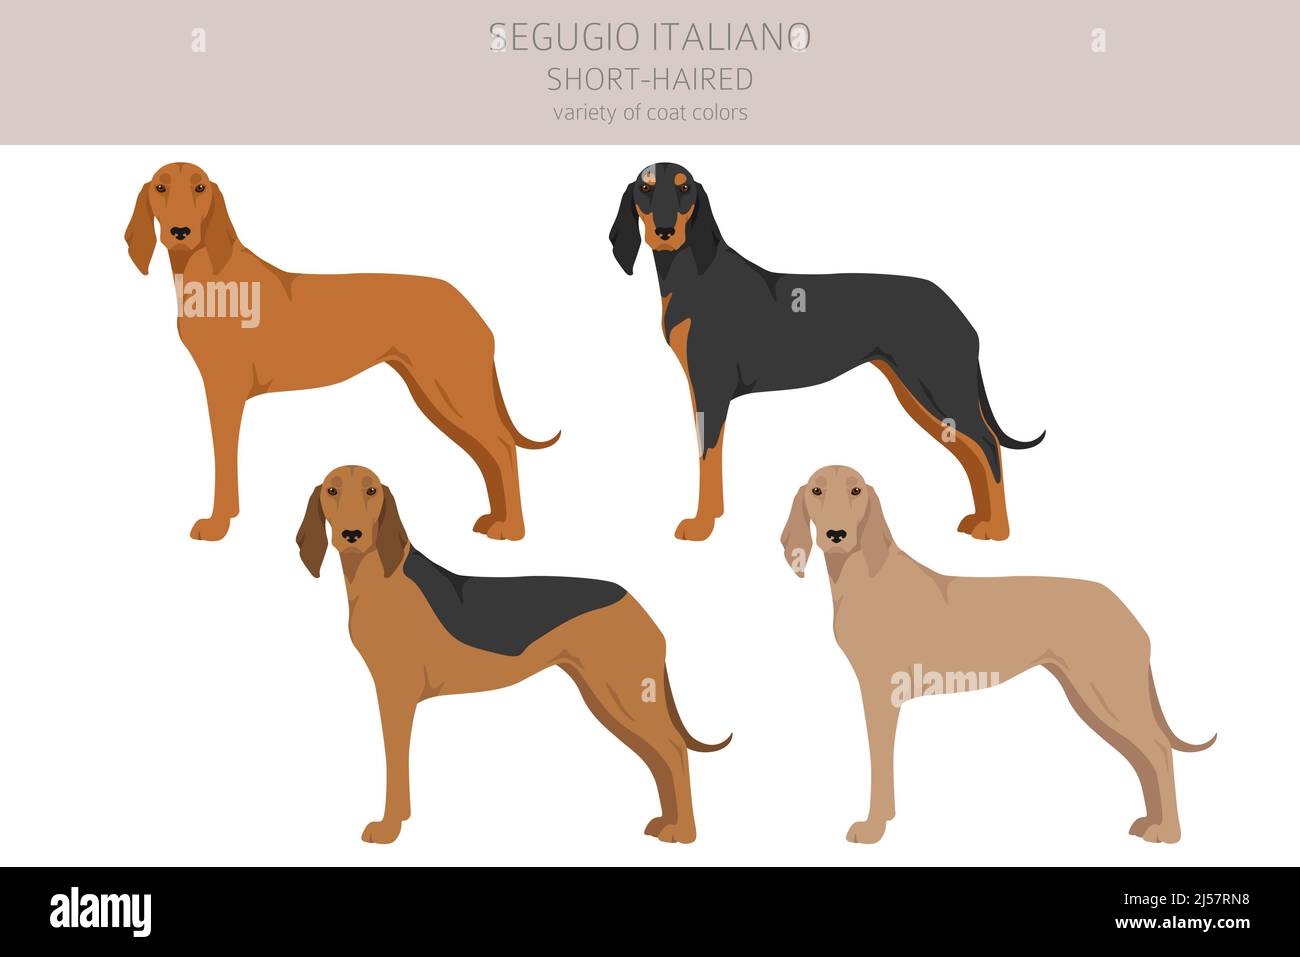 Segugio Italiano short haired clipart. Different poses, coat colors set.  Vector illustration Stock Vector